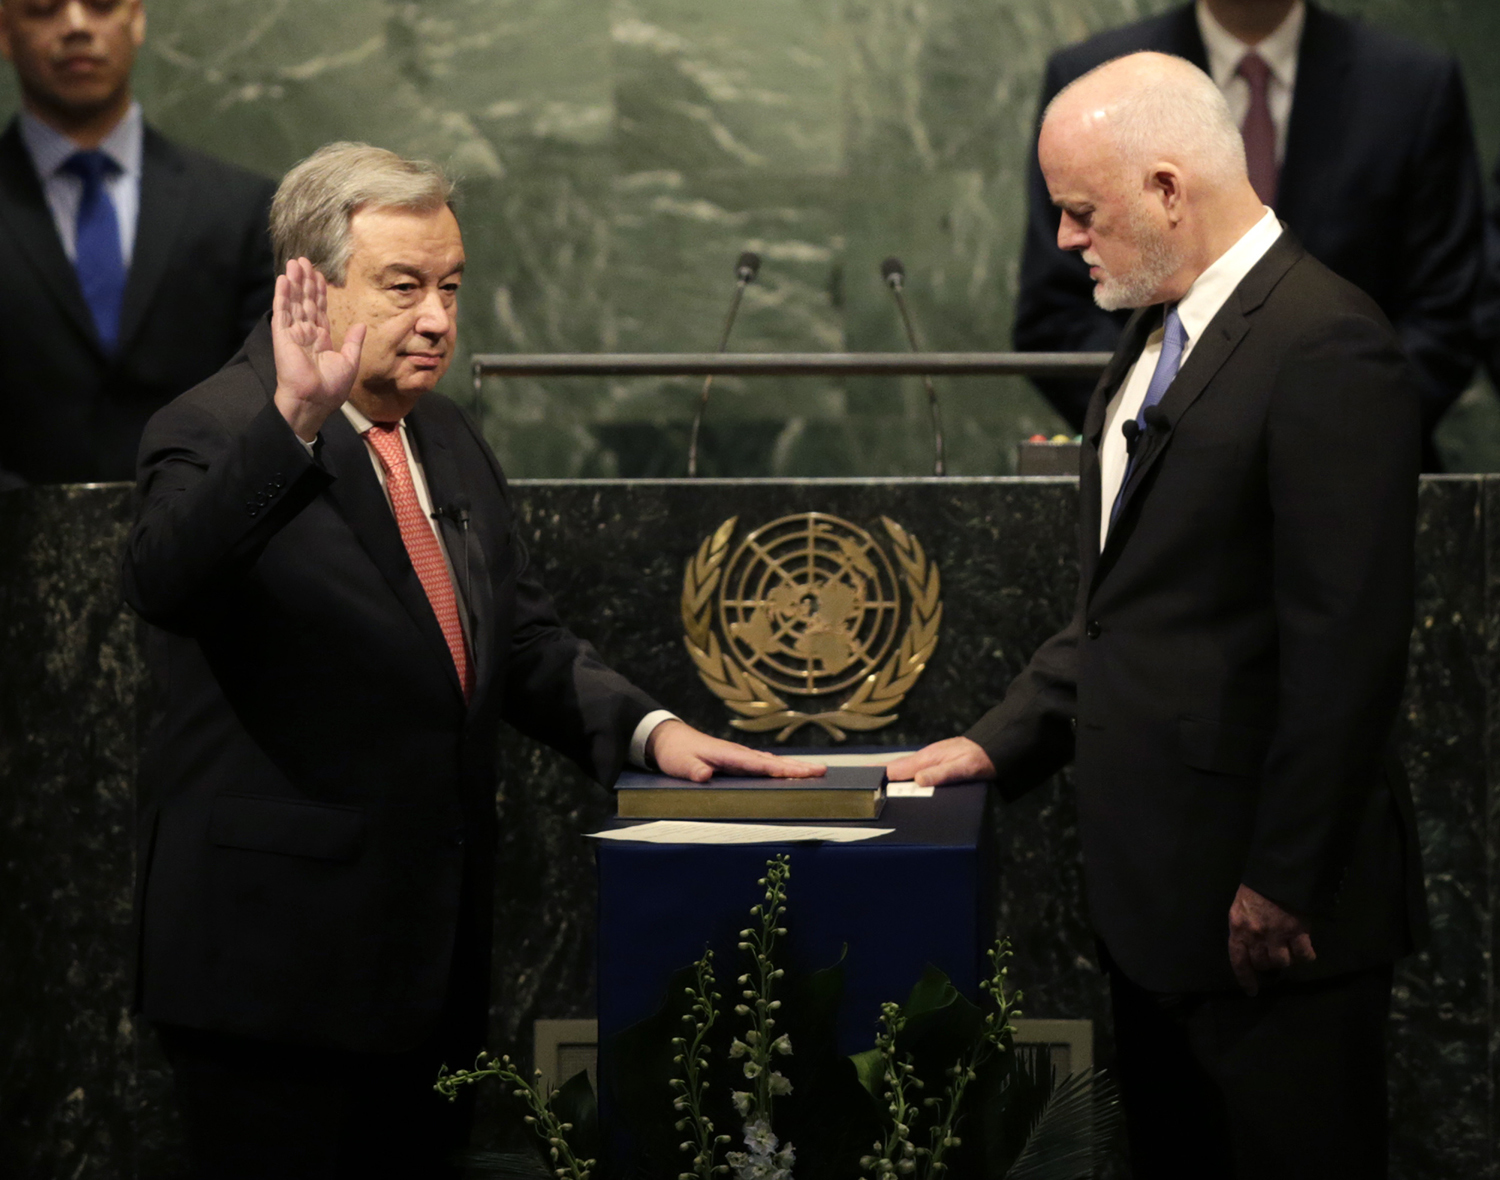 The United Nations Secretary-General designate Antonio Guterres, left, is sworn in by Peter Thomson, president of the UN General Assembly, at U.N. headquarters, Monday, Dec. 12, 2016. (AP Photo/Seth Wenig)